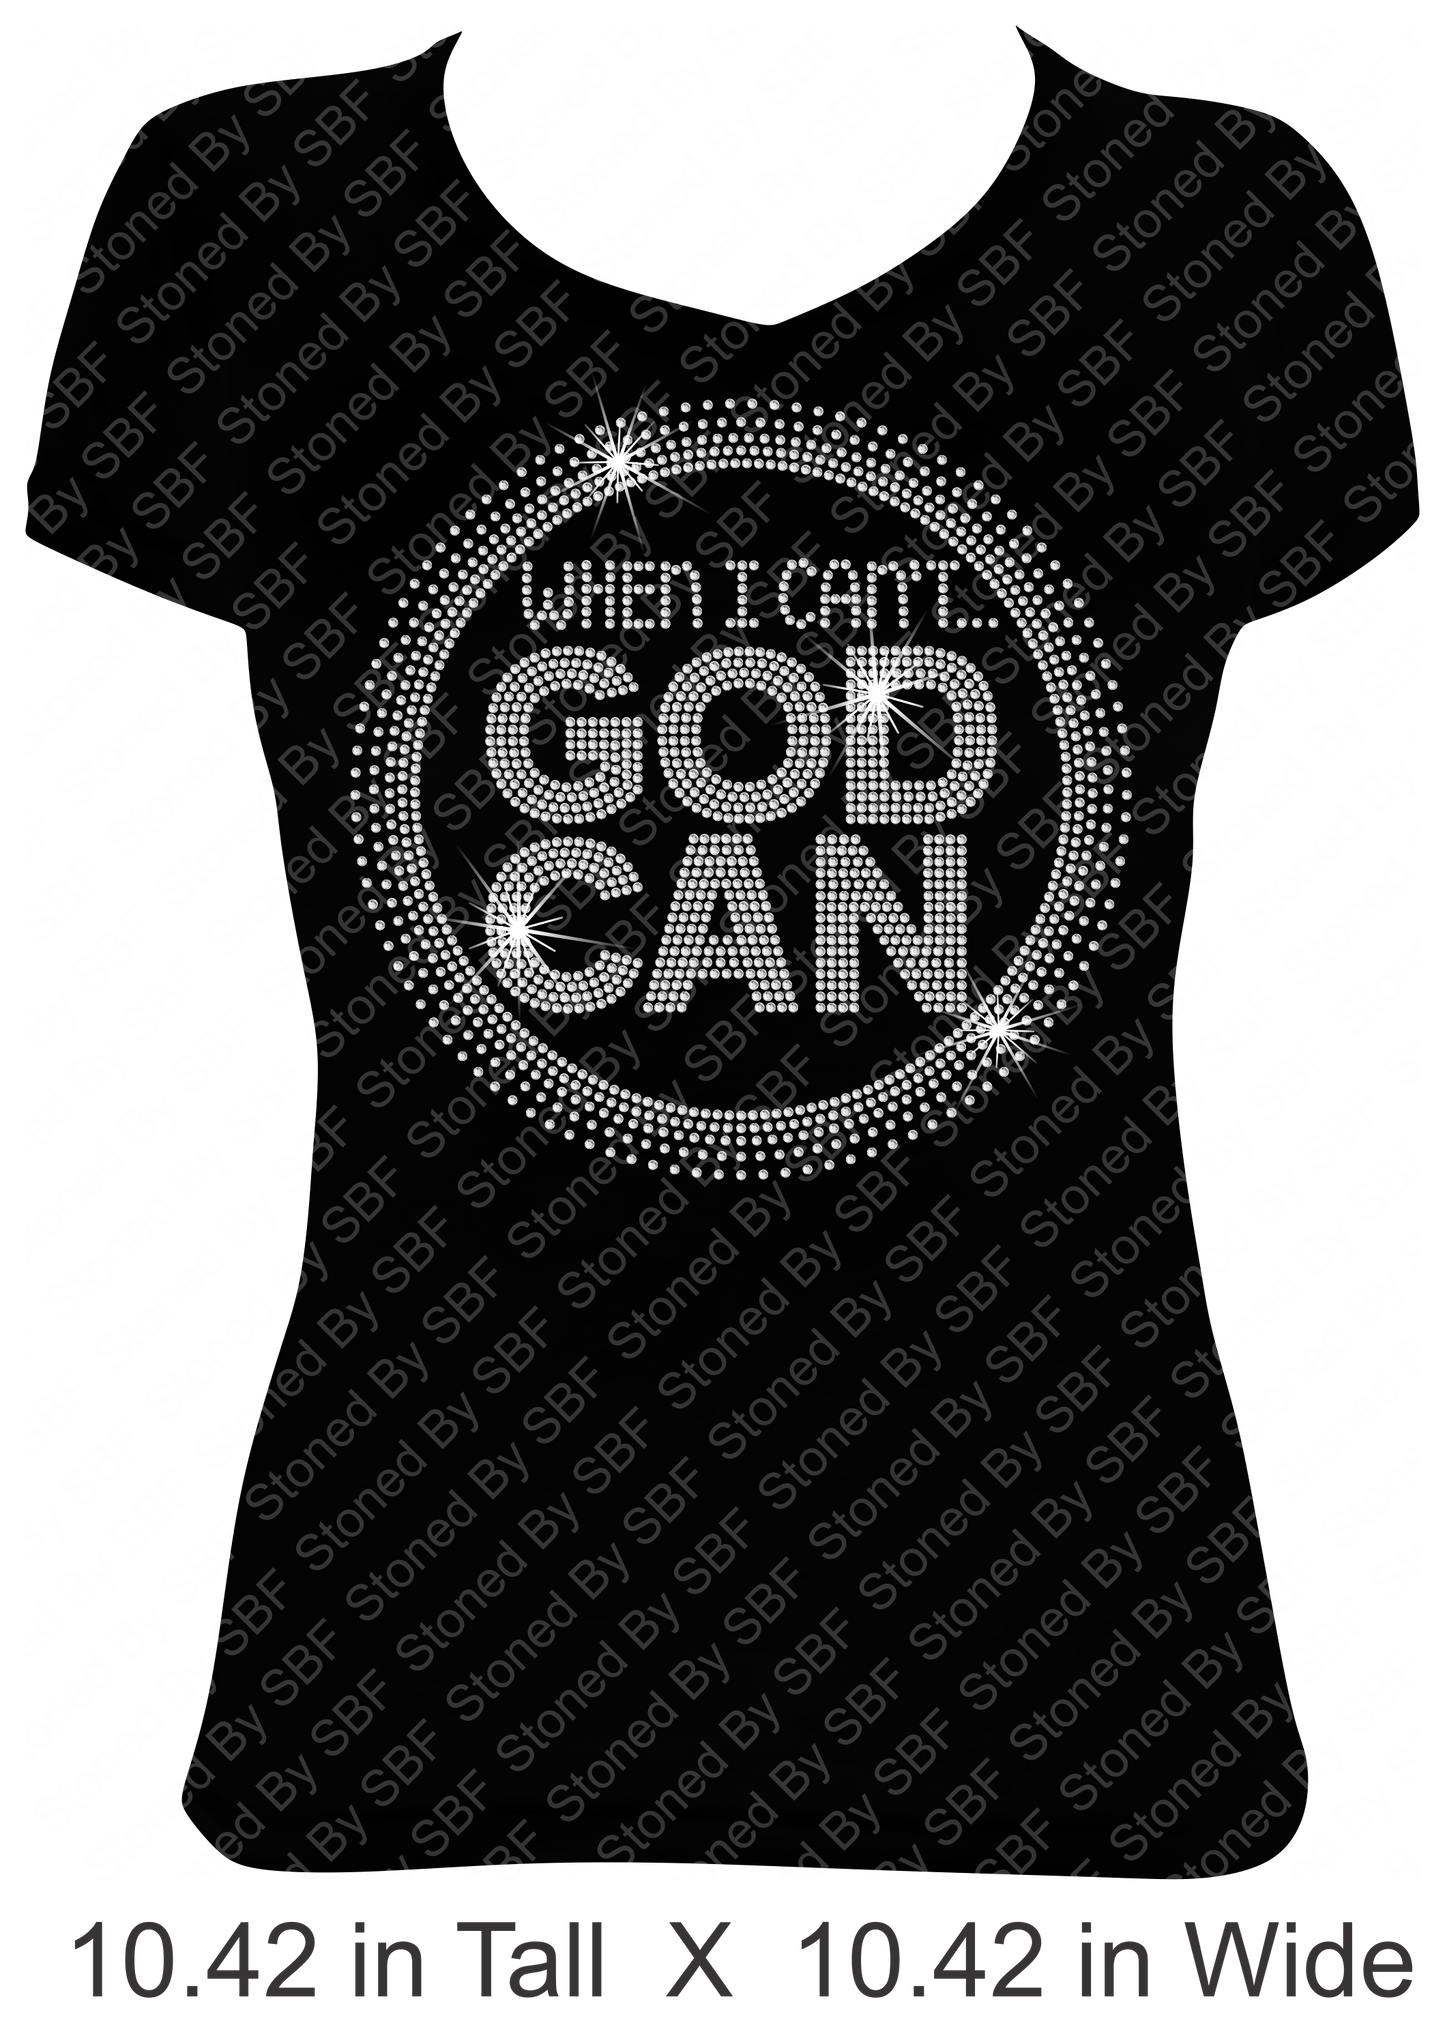 When I Can't... God Can